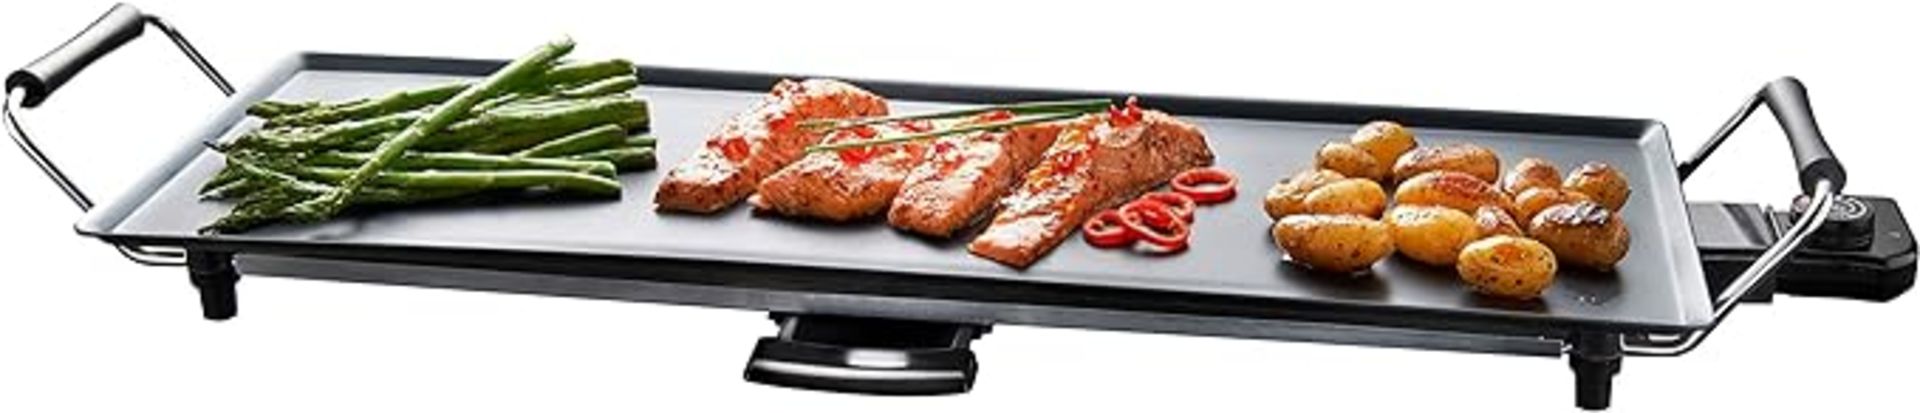 Quest 32529 XL Teppanyaki Grill/Non-Stick/Adjustable Thermostat/Accessories Included/Ideal for